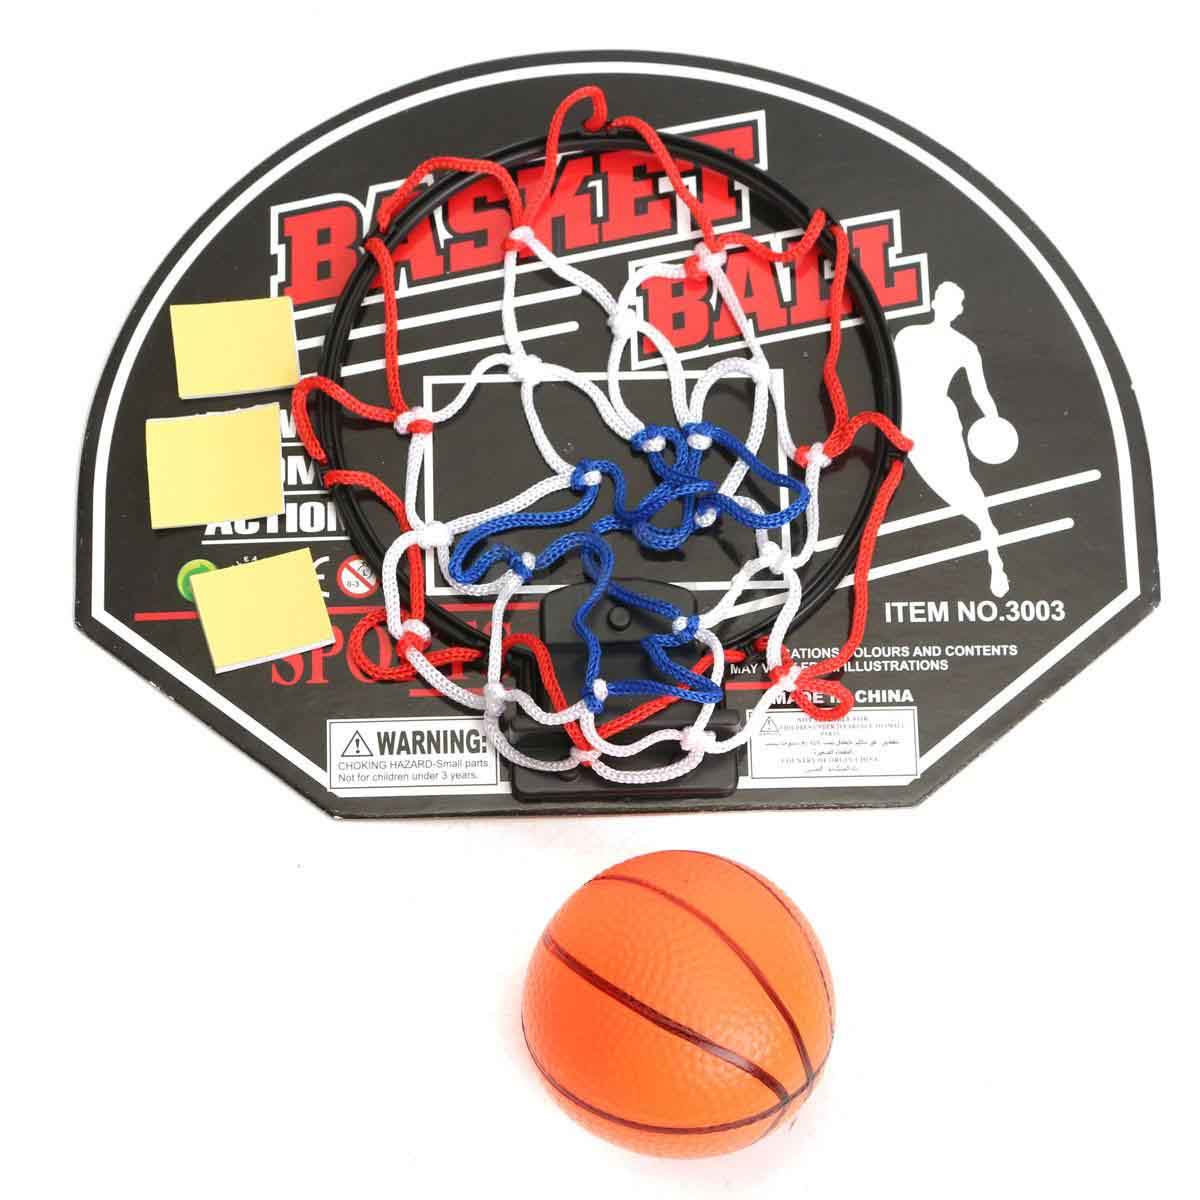 3* Ball and Basketball Hoop Mini Indoor Bath Ball Net Childrens Game Toy 